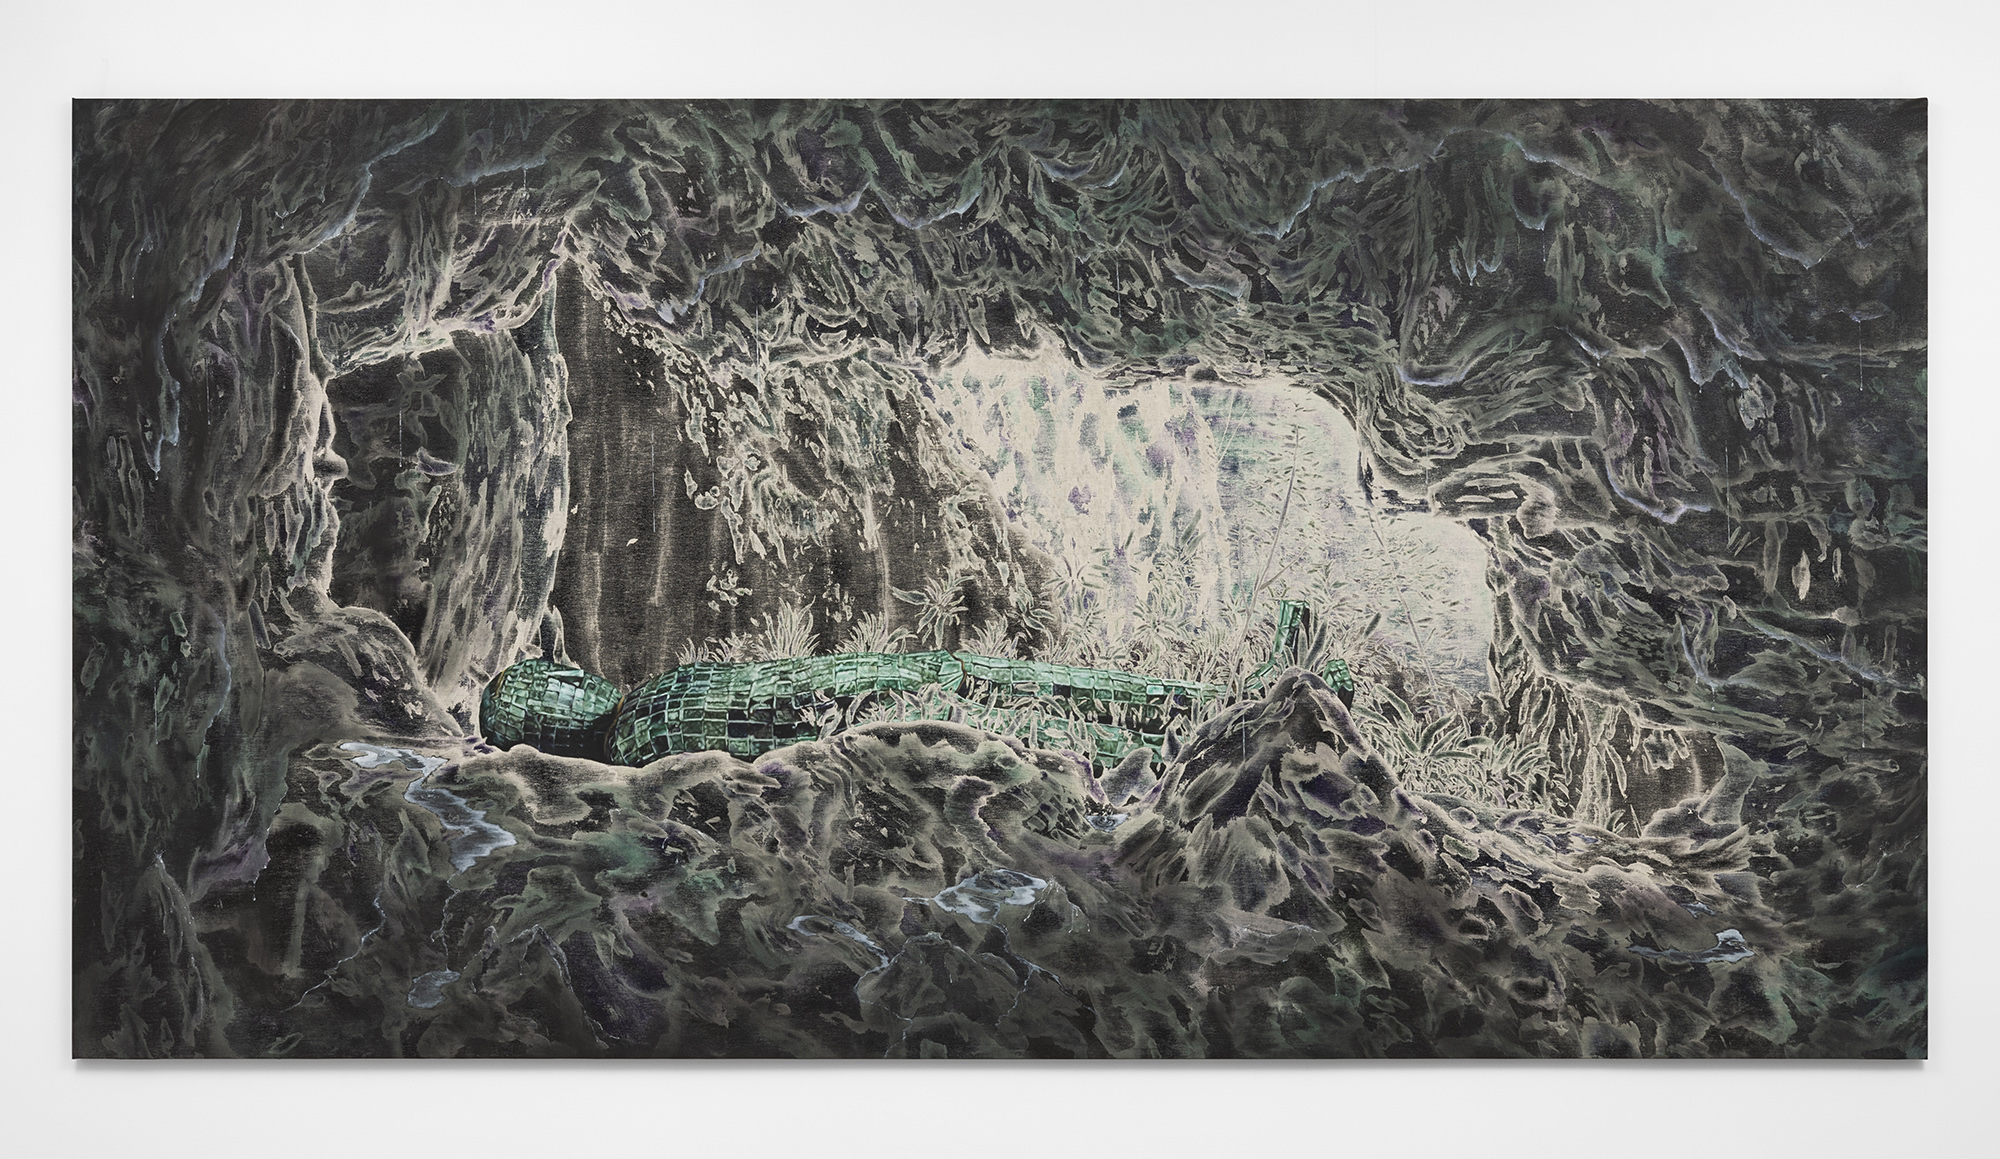 Michael Ho, Buried Like a Certain Kind of Truth, 2023, Oil and acrylic on canvas, 215 x 415 cm, 84 5/8 x 163 3/8 in.